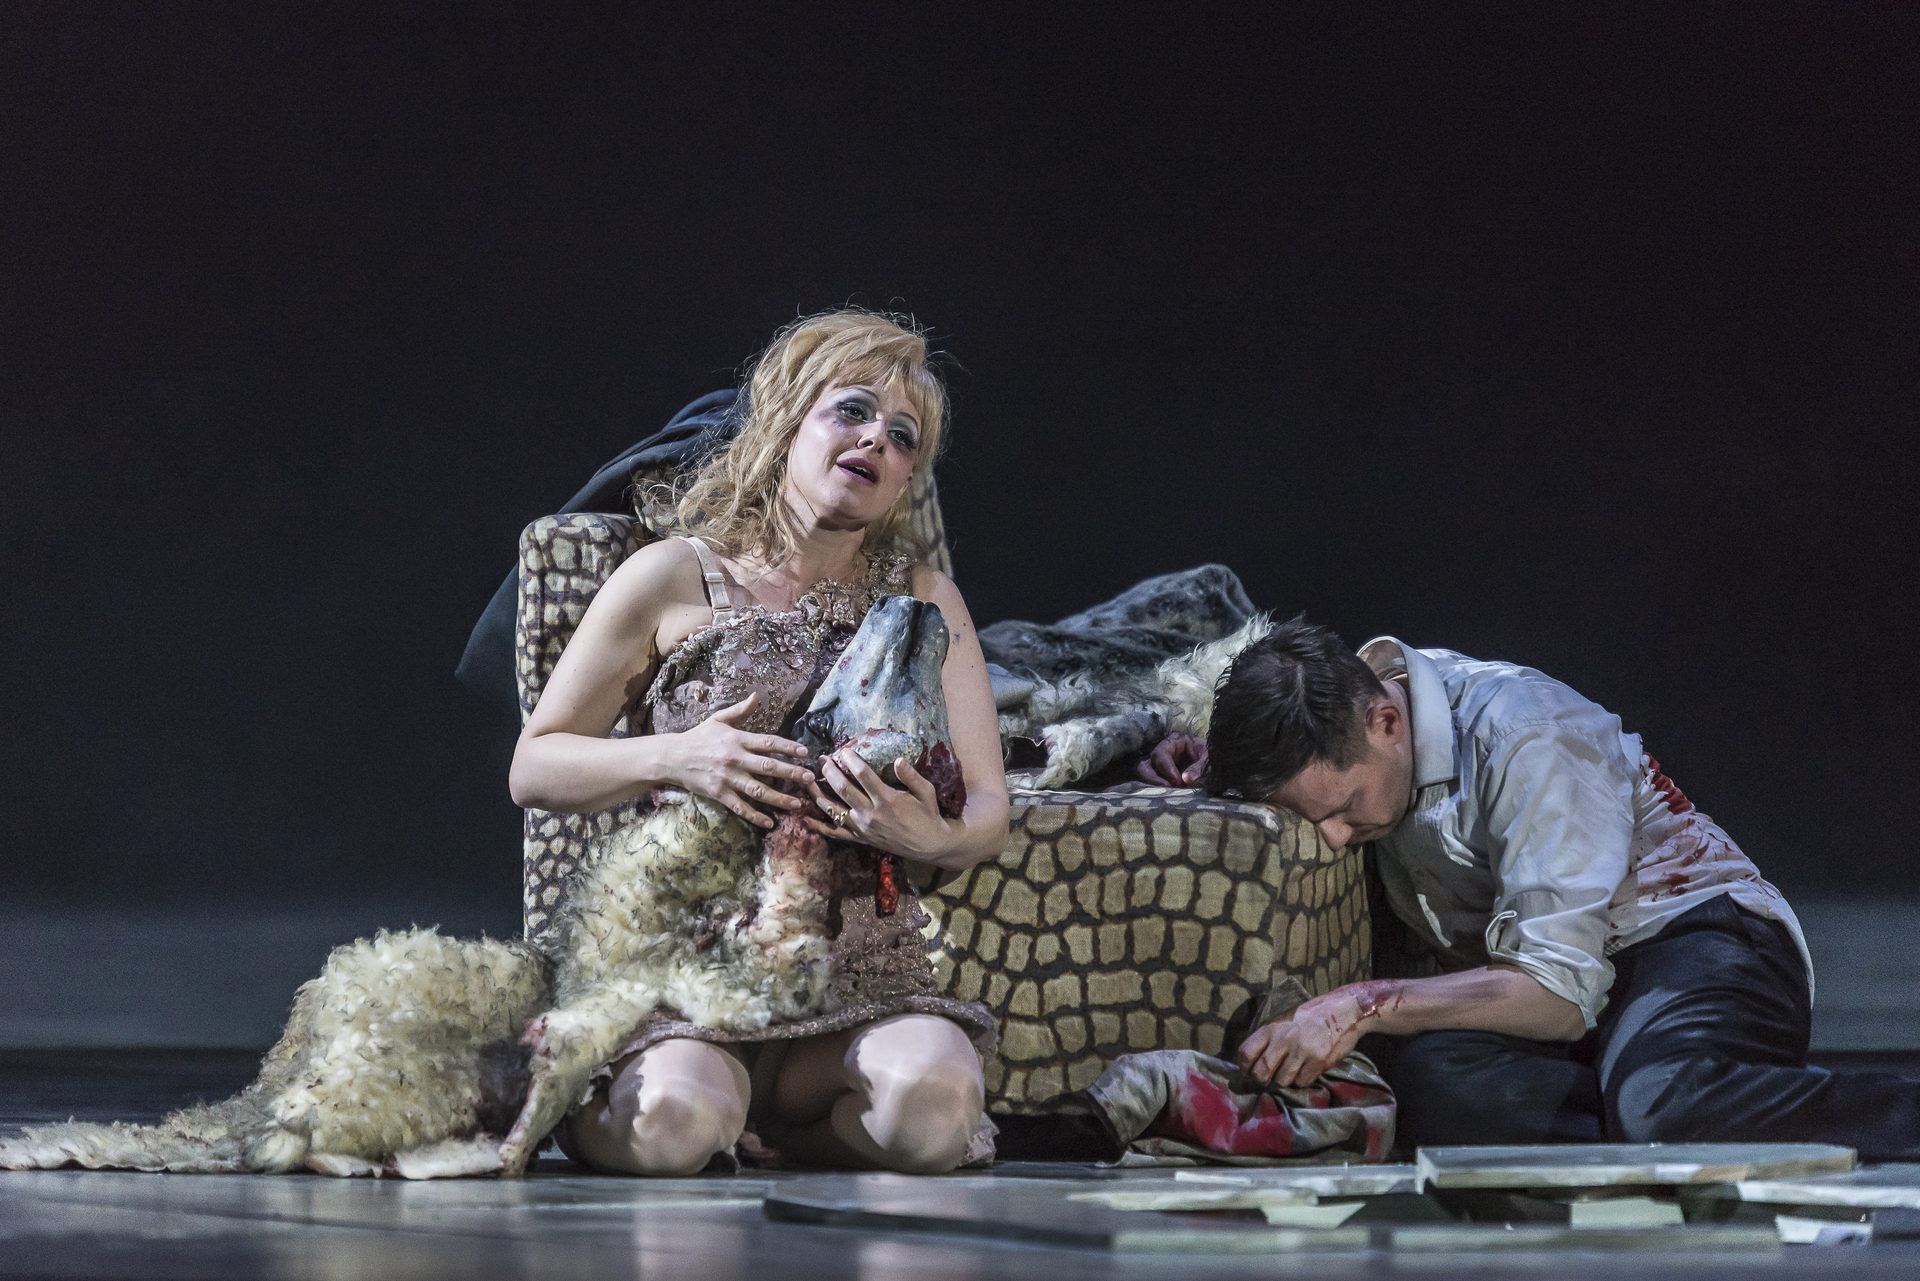 scene from Exterminating Angel (Thomas Ades) opera at ROH, a woman in great distress clutches a sheep's head